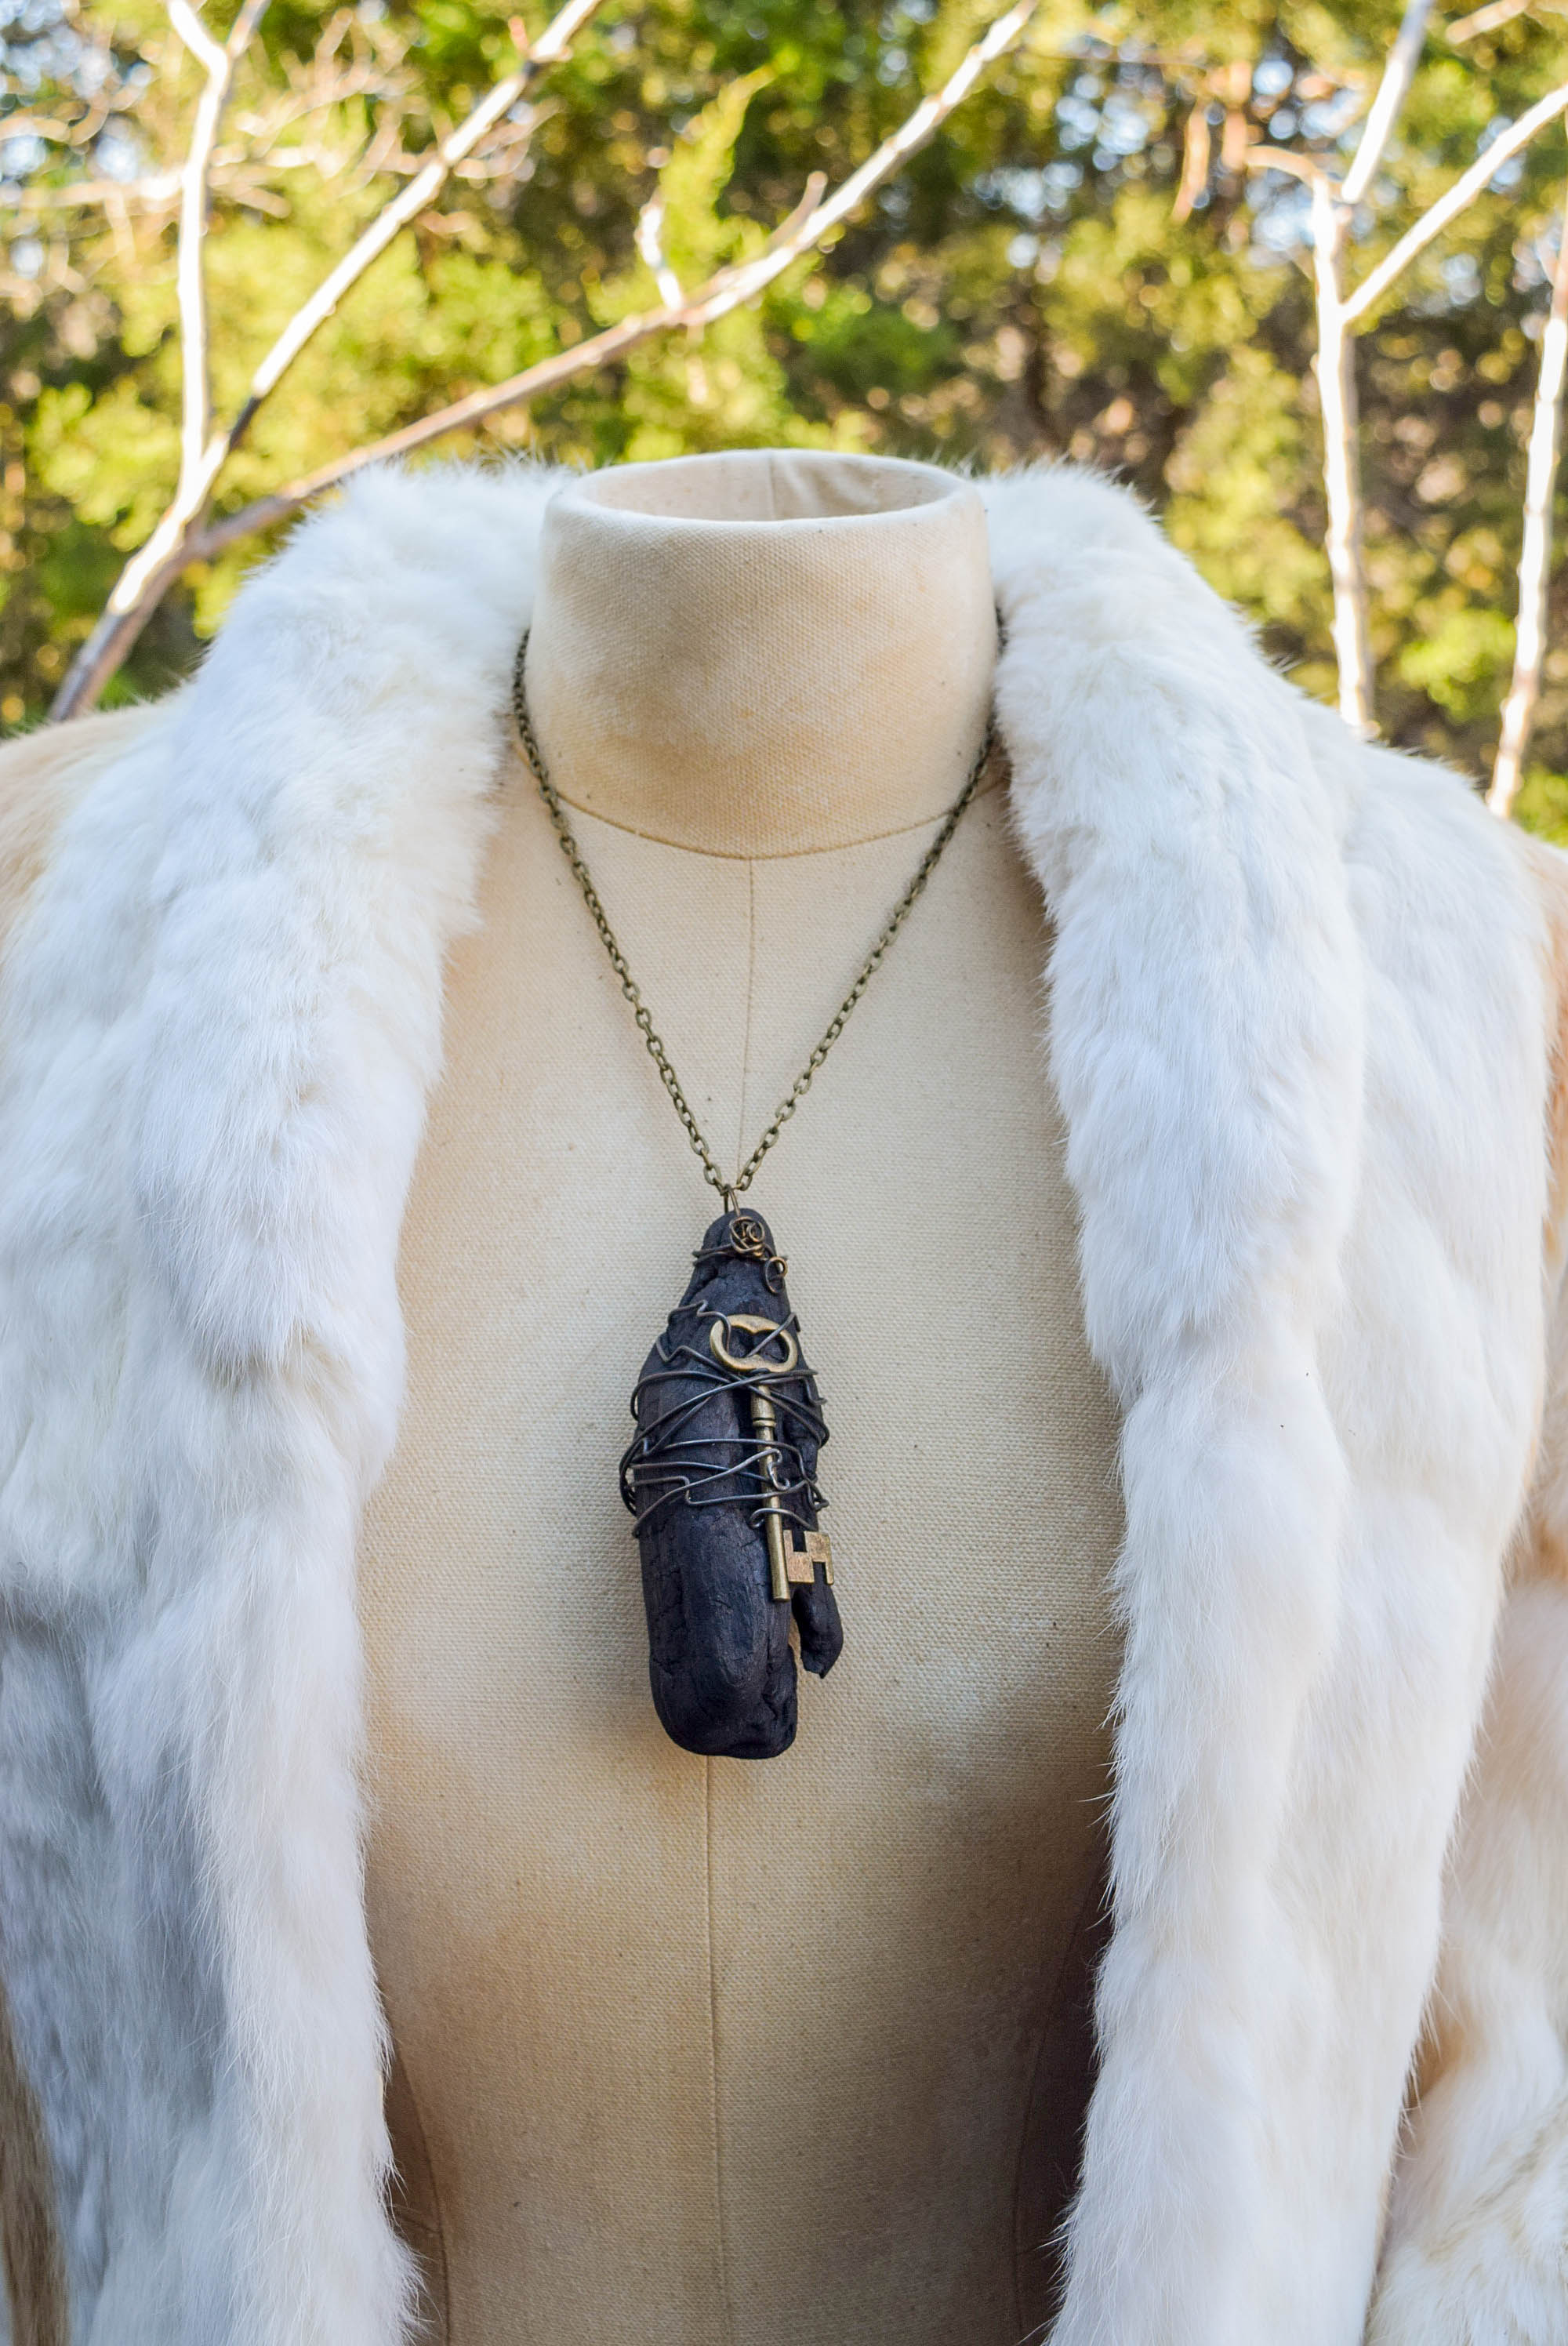 Driftwood Necklace with an Antique Style Key for Freedom and Hidden Knowledge